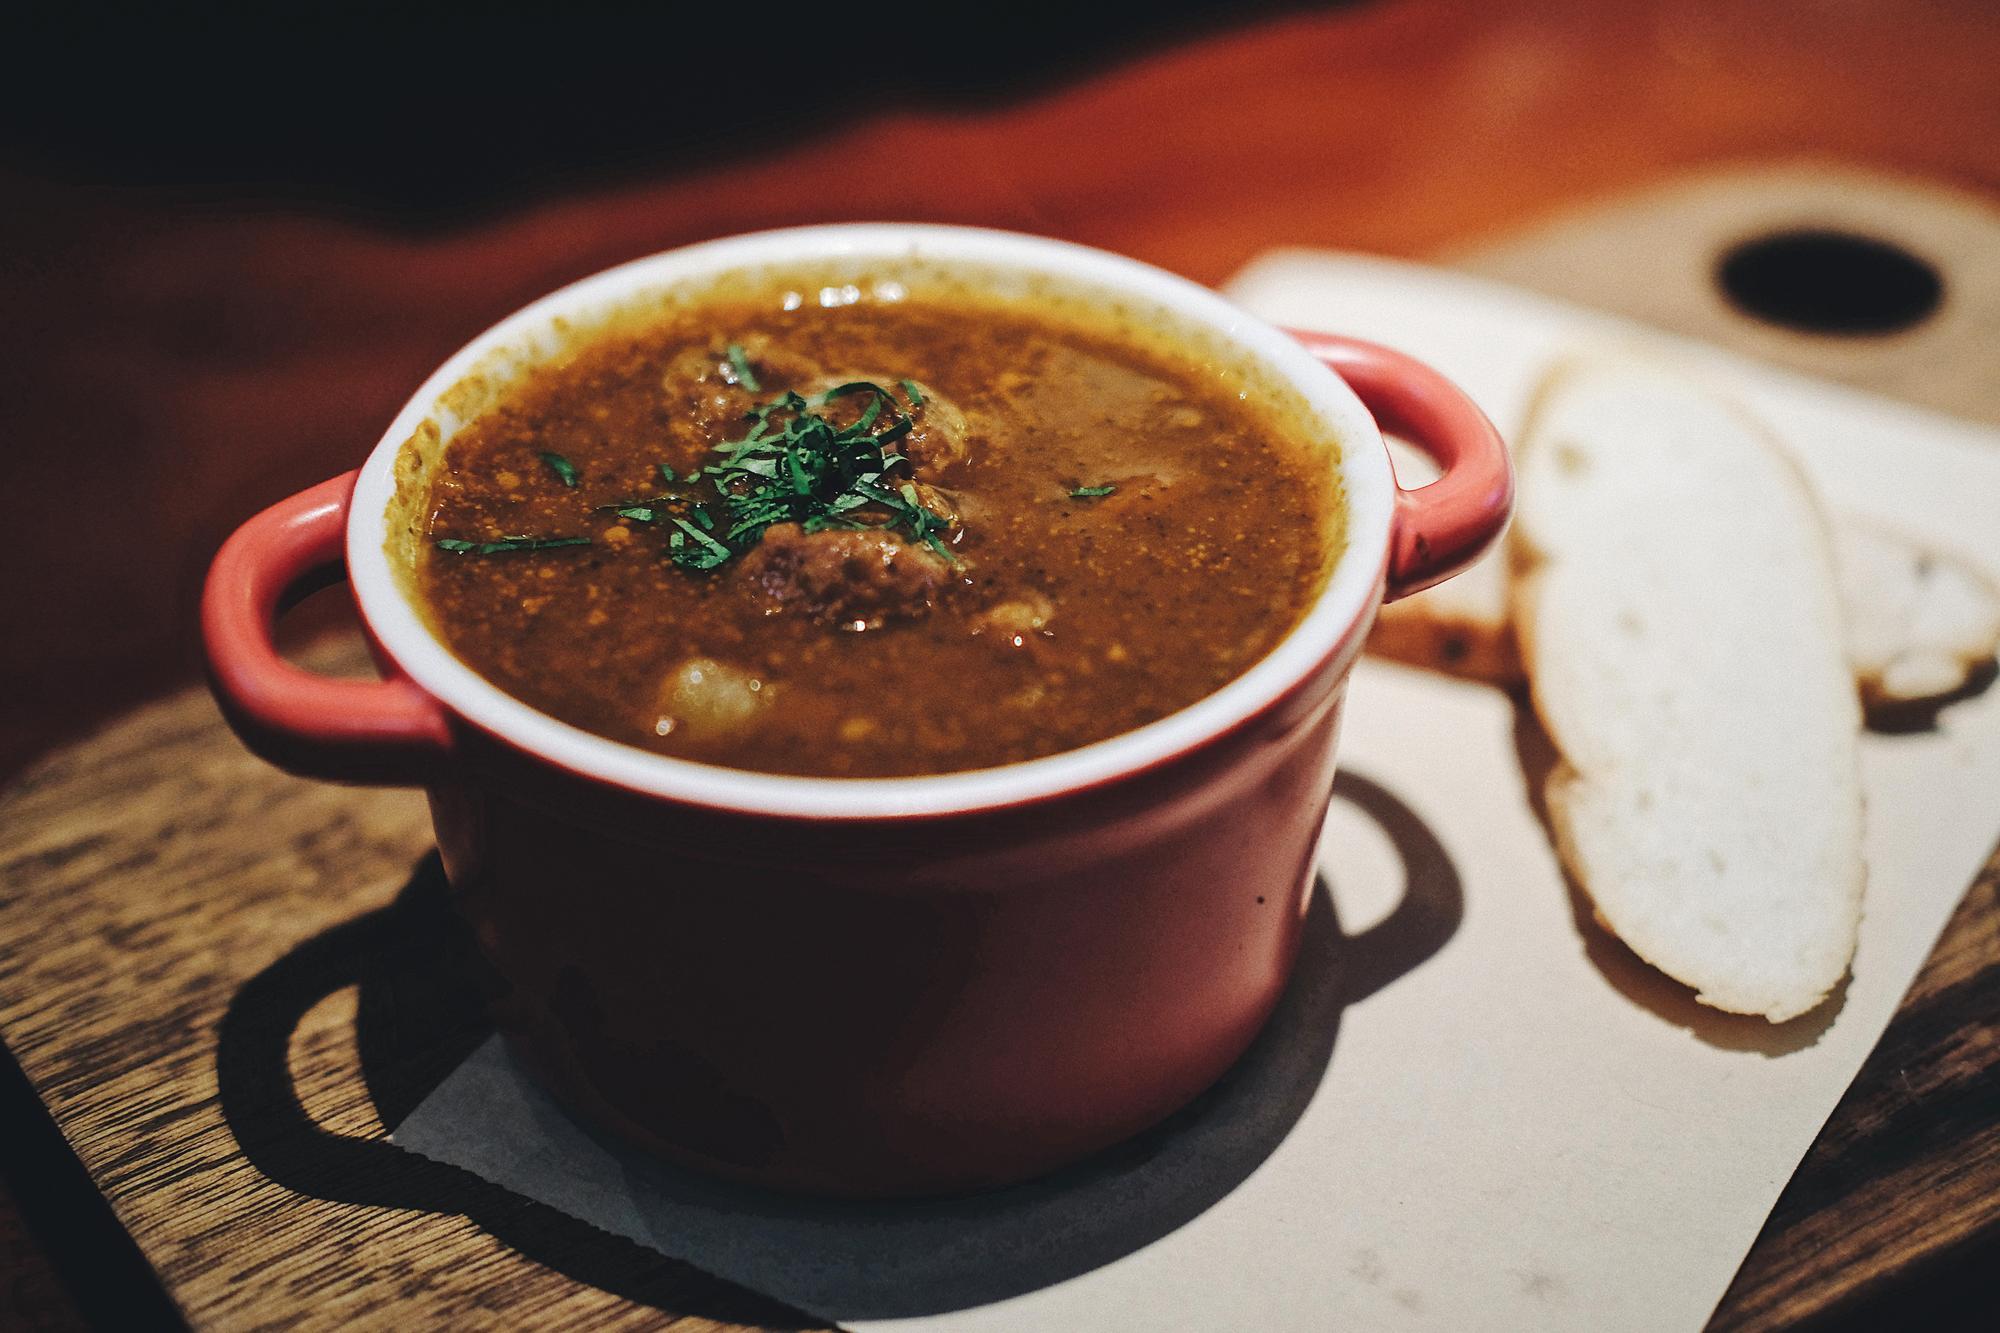 A bowl of soup with a slice of bread alongside.